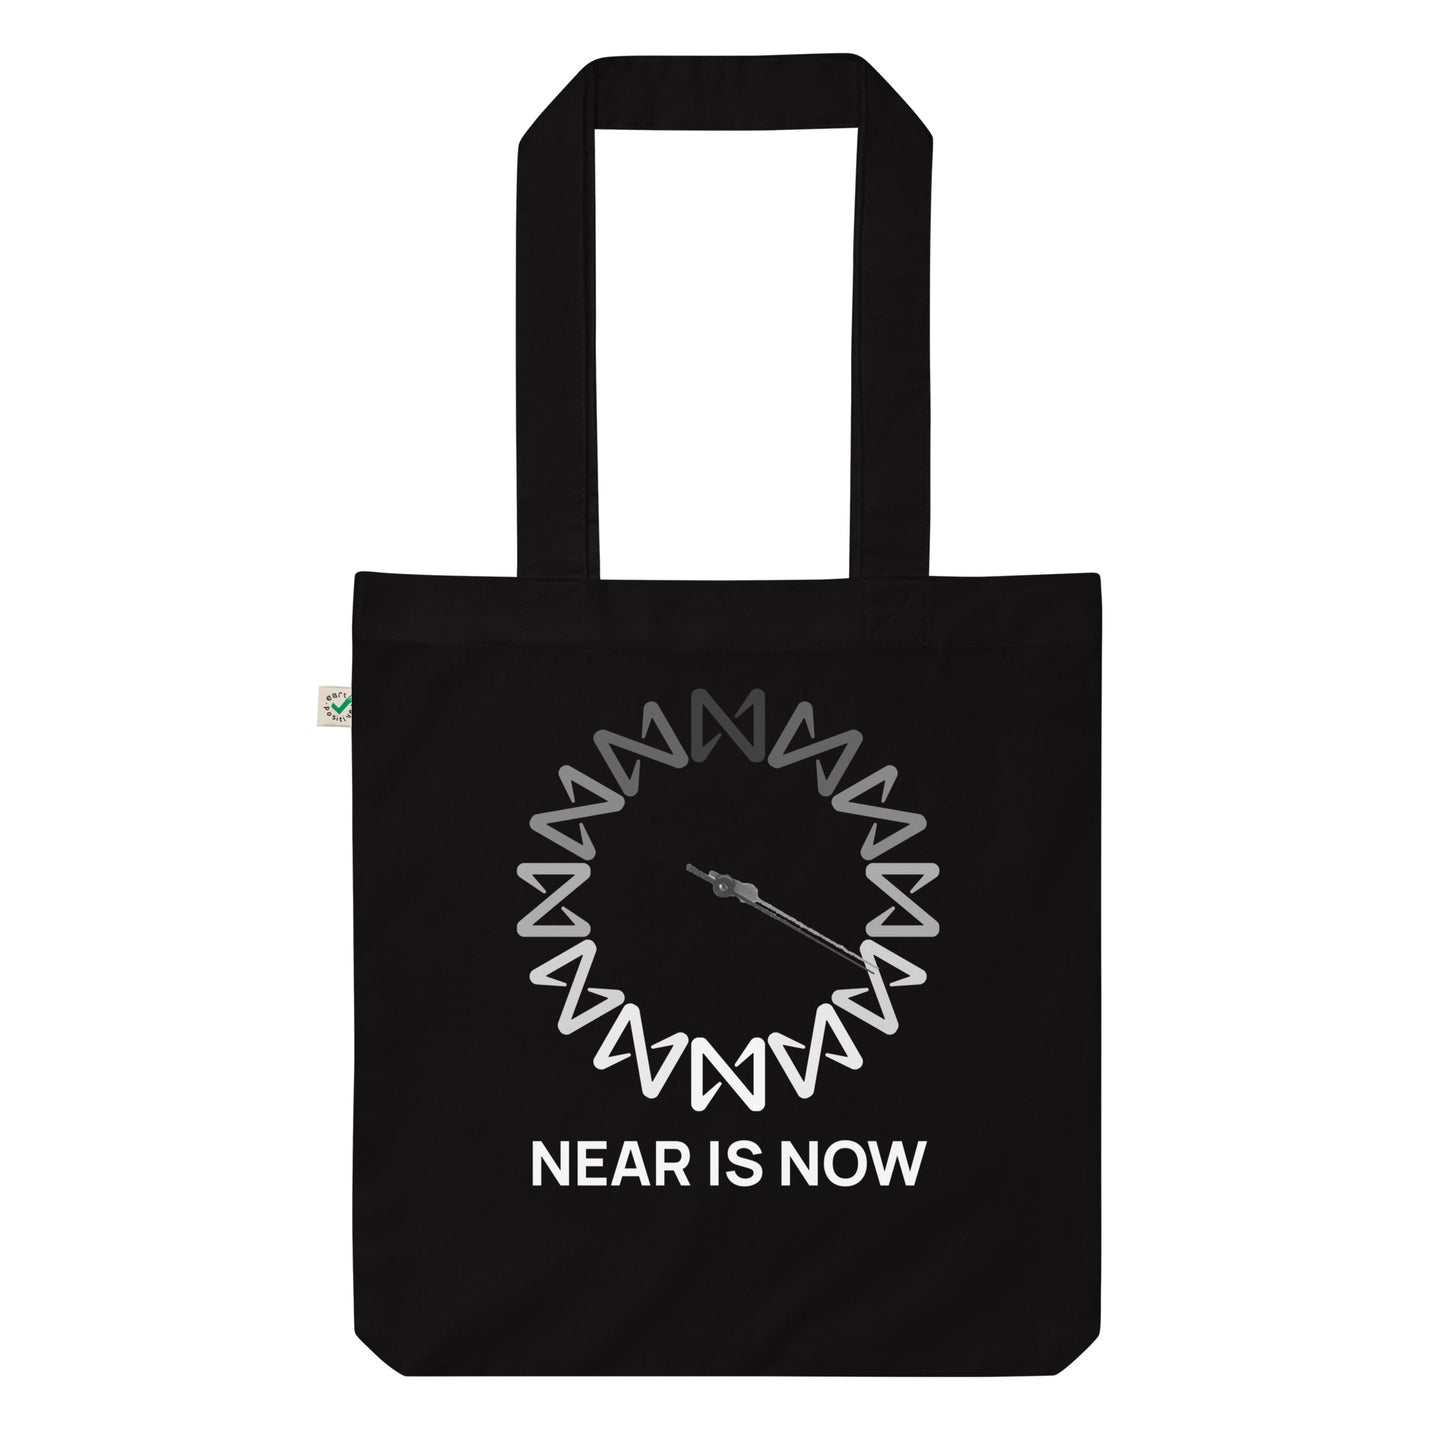 NEAR IS NOW Printed Tote Bag